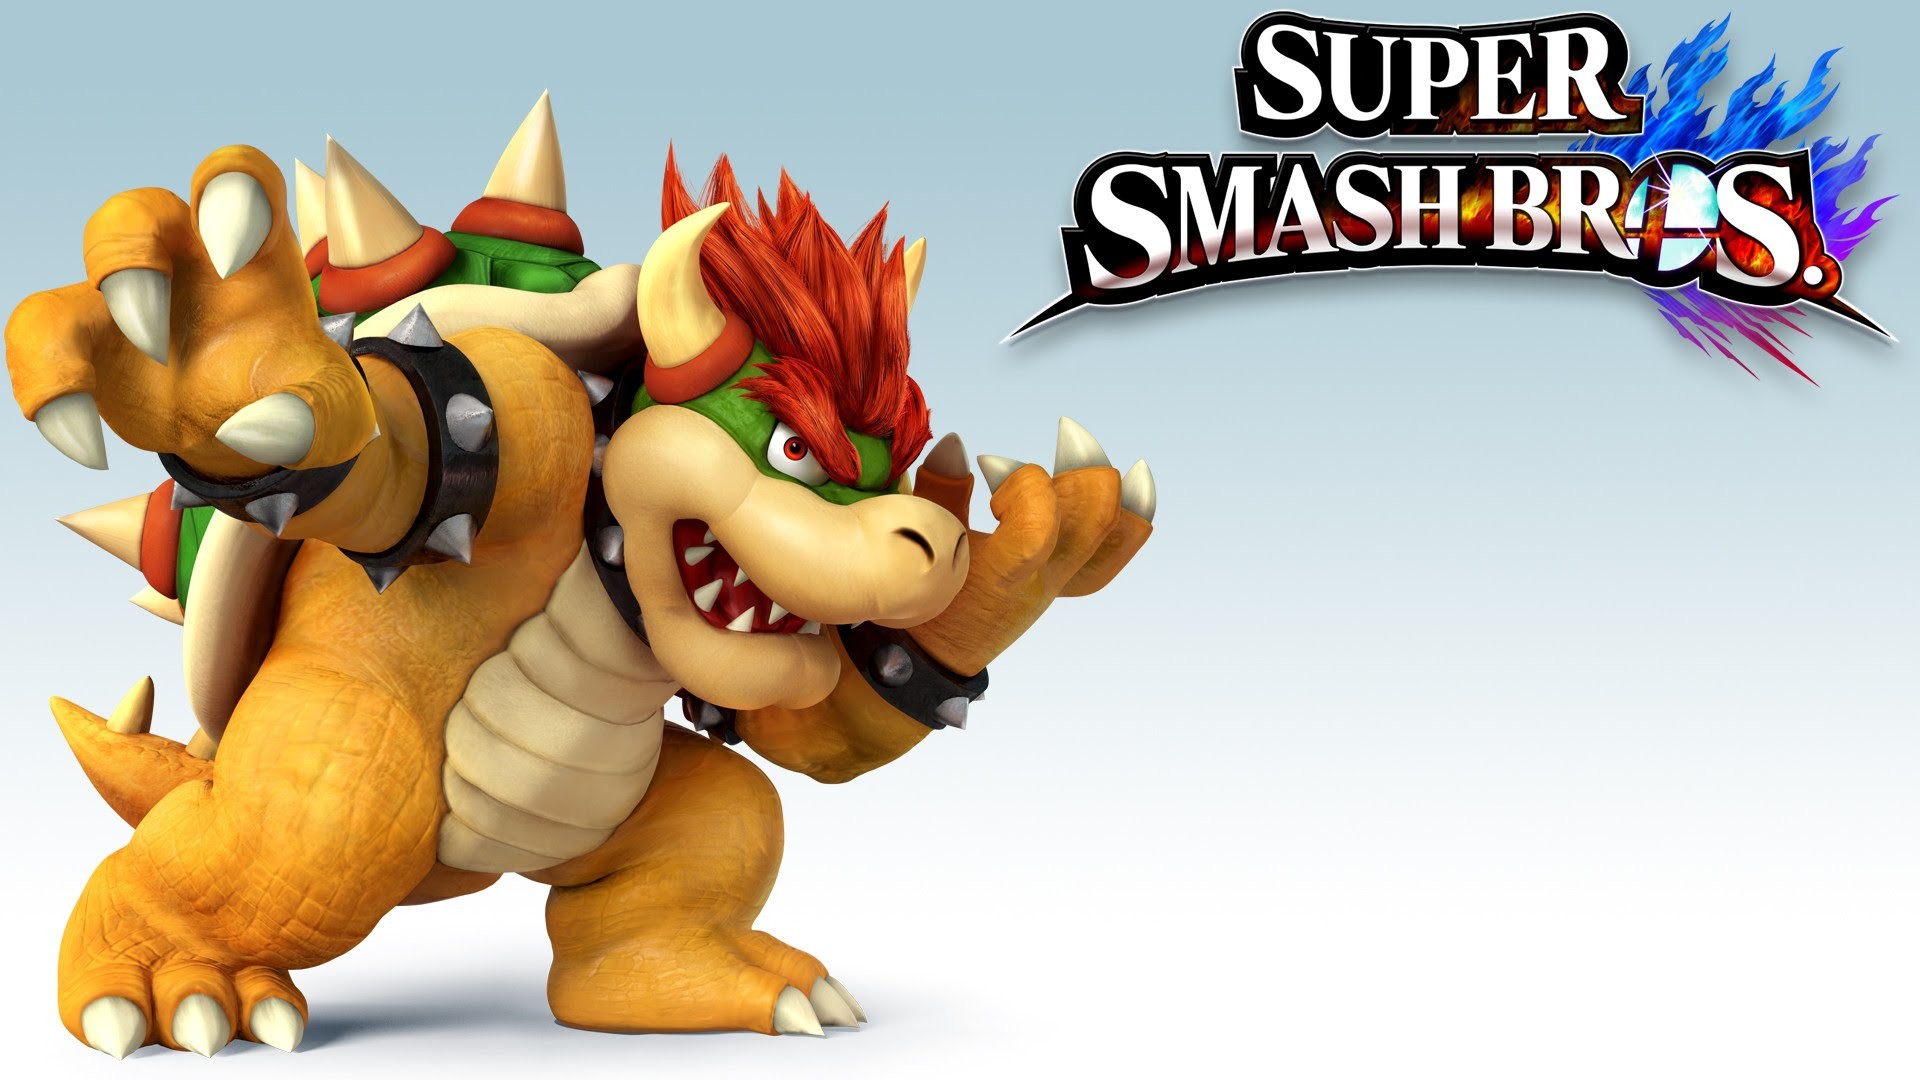 1920x1080 Super Smash Bros: Online Matches Montage (Bowser/Mii Fighter) - YouTube